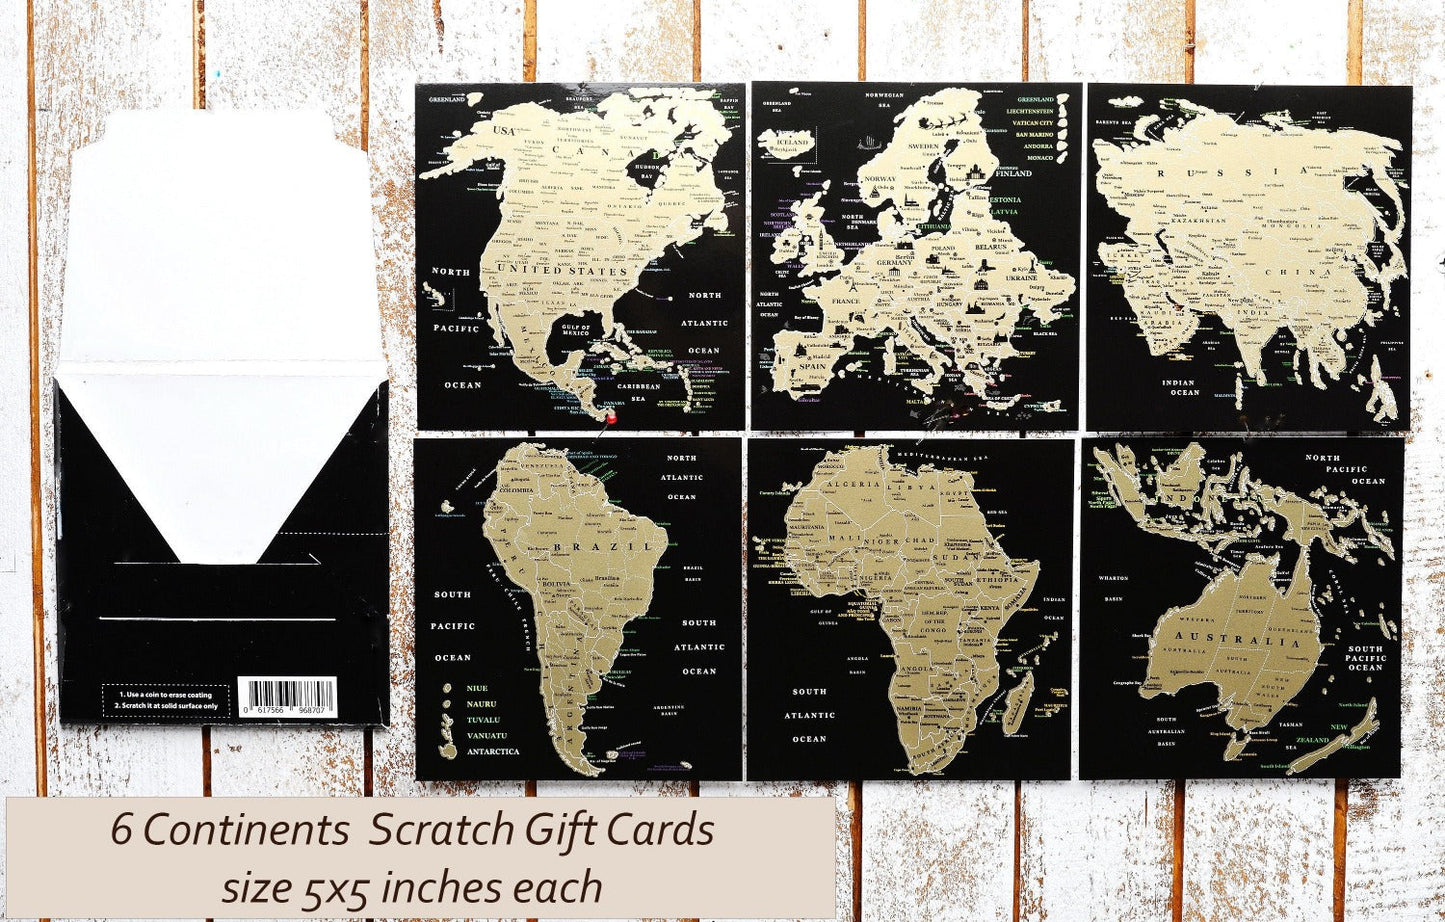 Scratch off map Greetings card Set of 6 Scratch World cards Continents